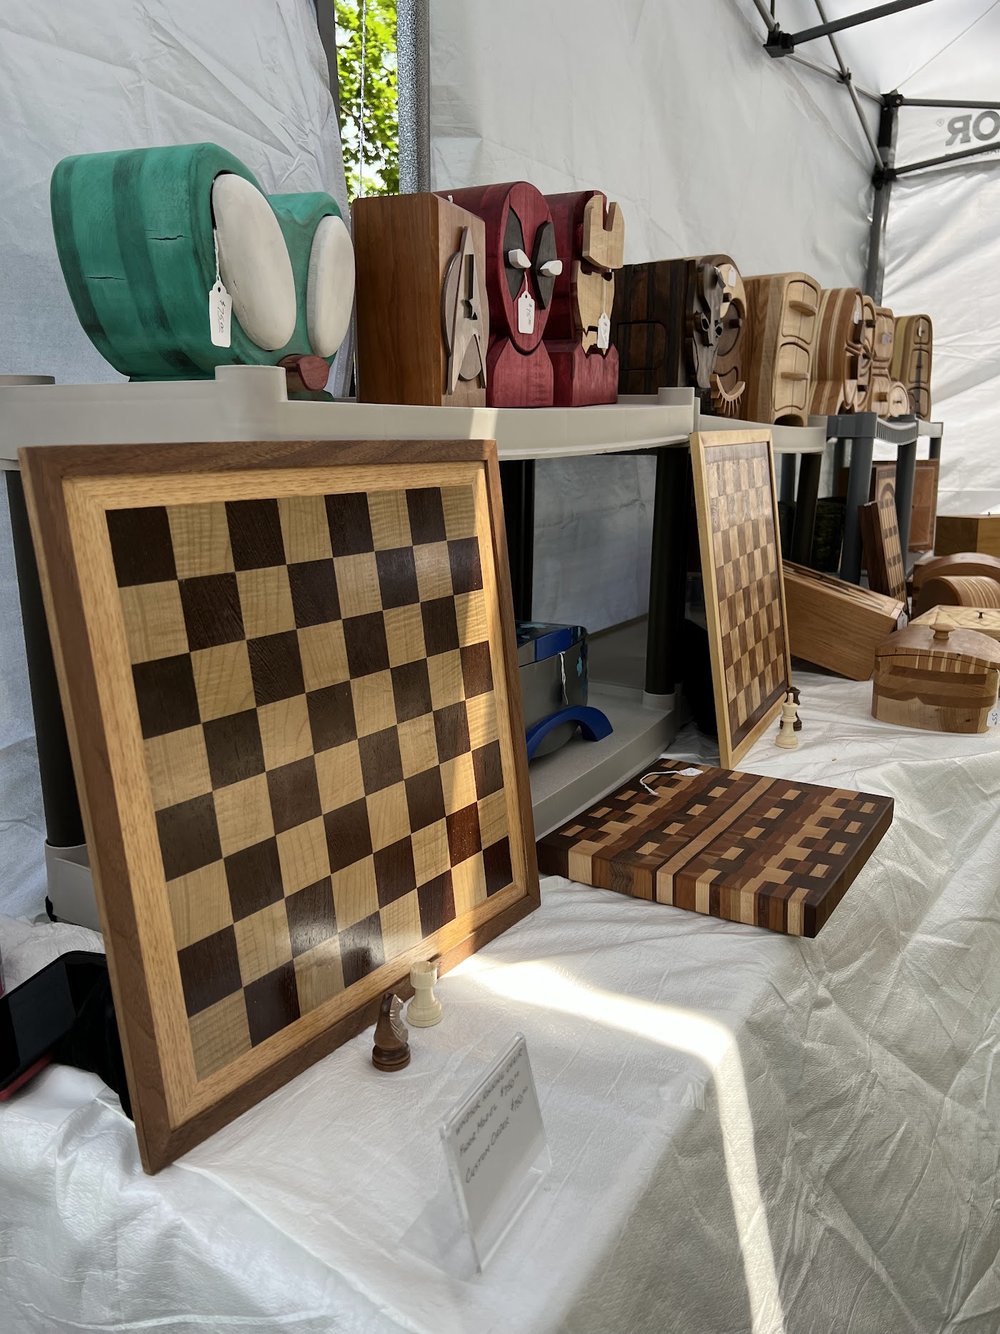 steve skornicka band saw boxes and chess boards.jpeg